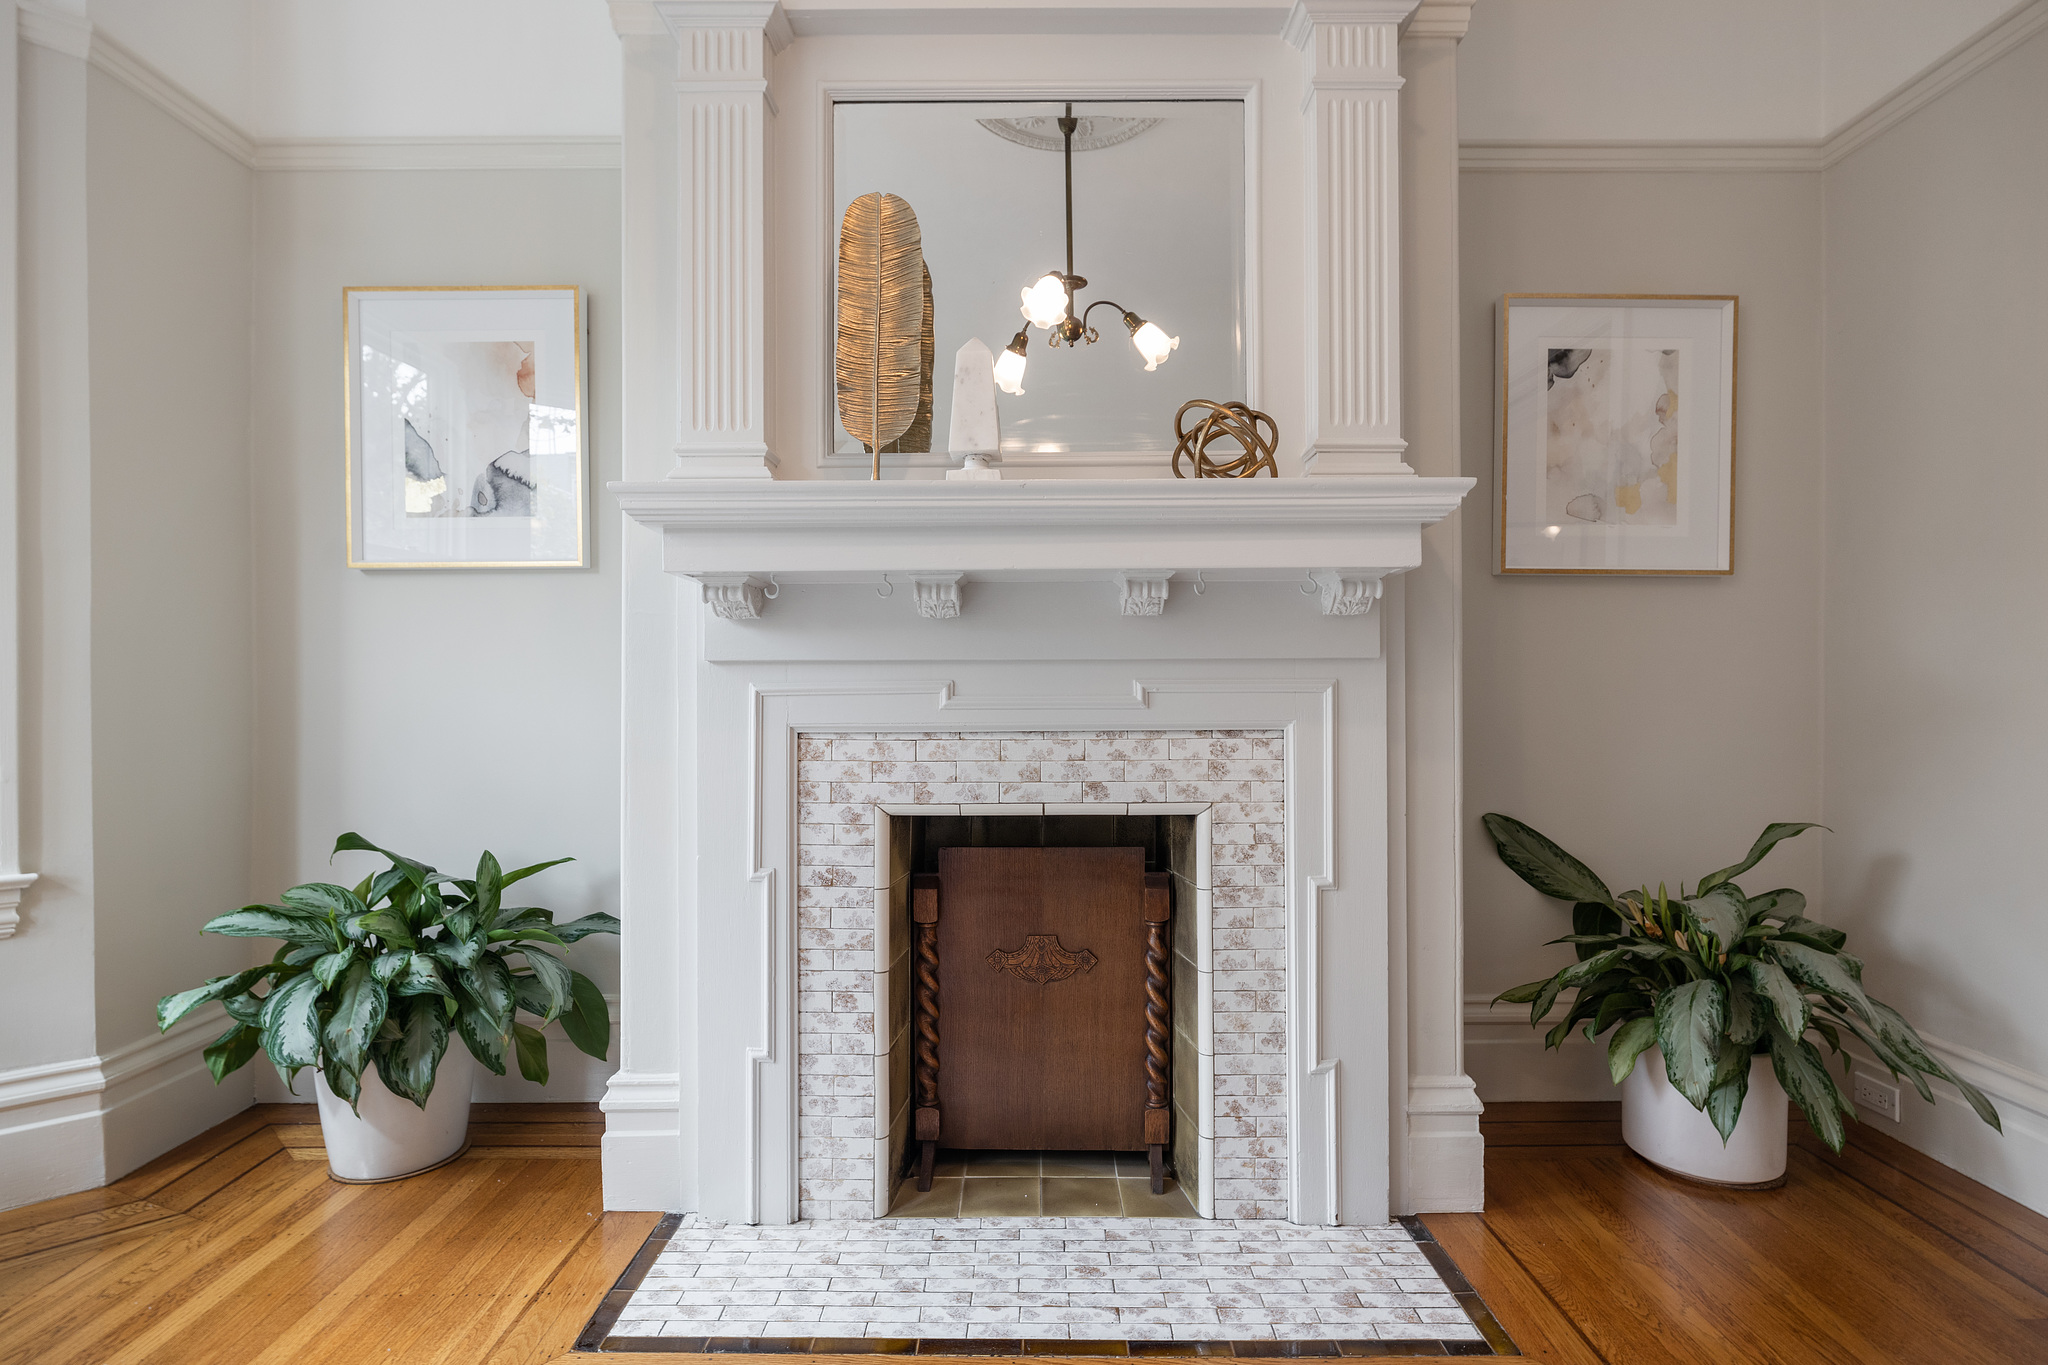 Property Photo: Up-close view of a tiled fireplace with white wood